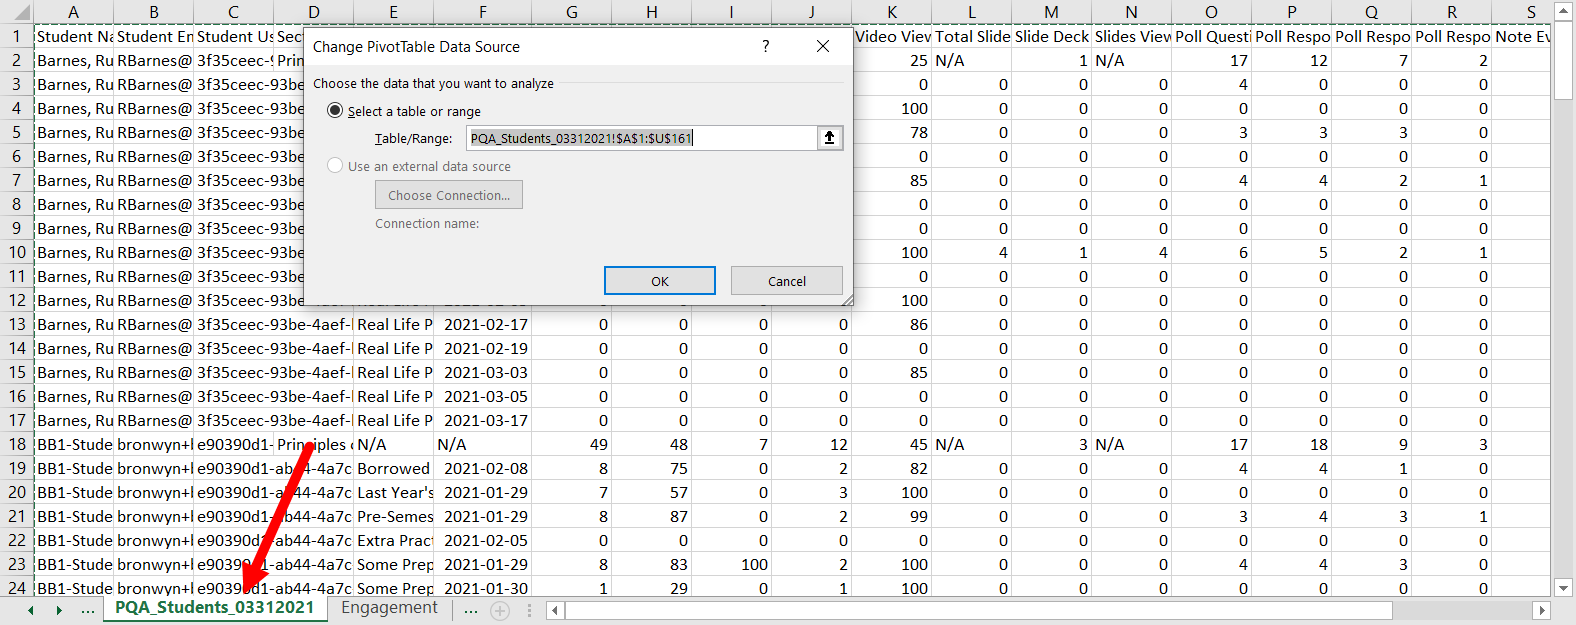 Change data source dialog box on top of original worksheet with newly pasted data